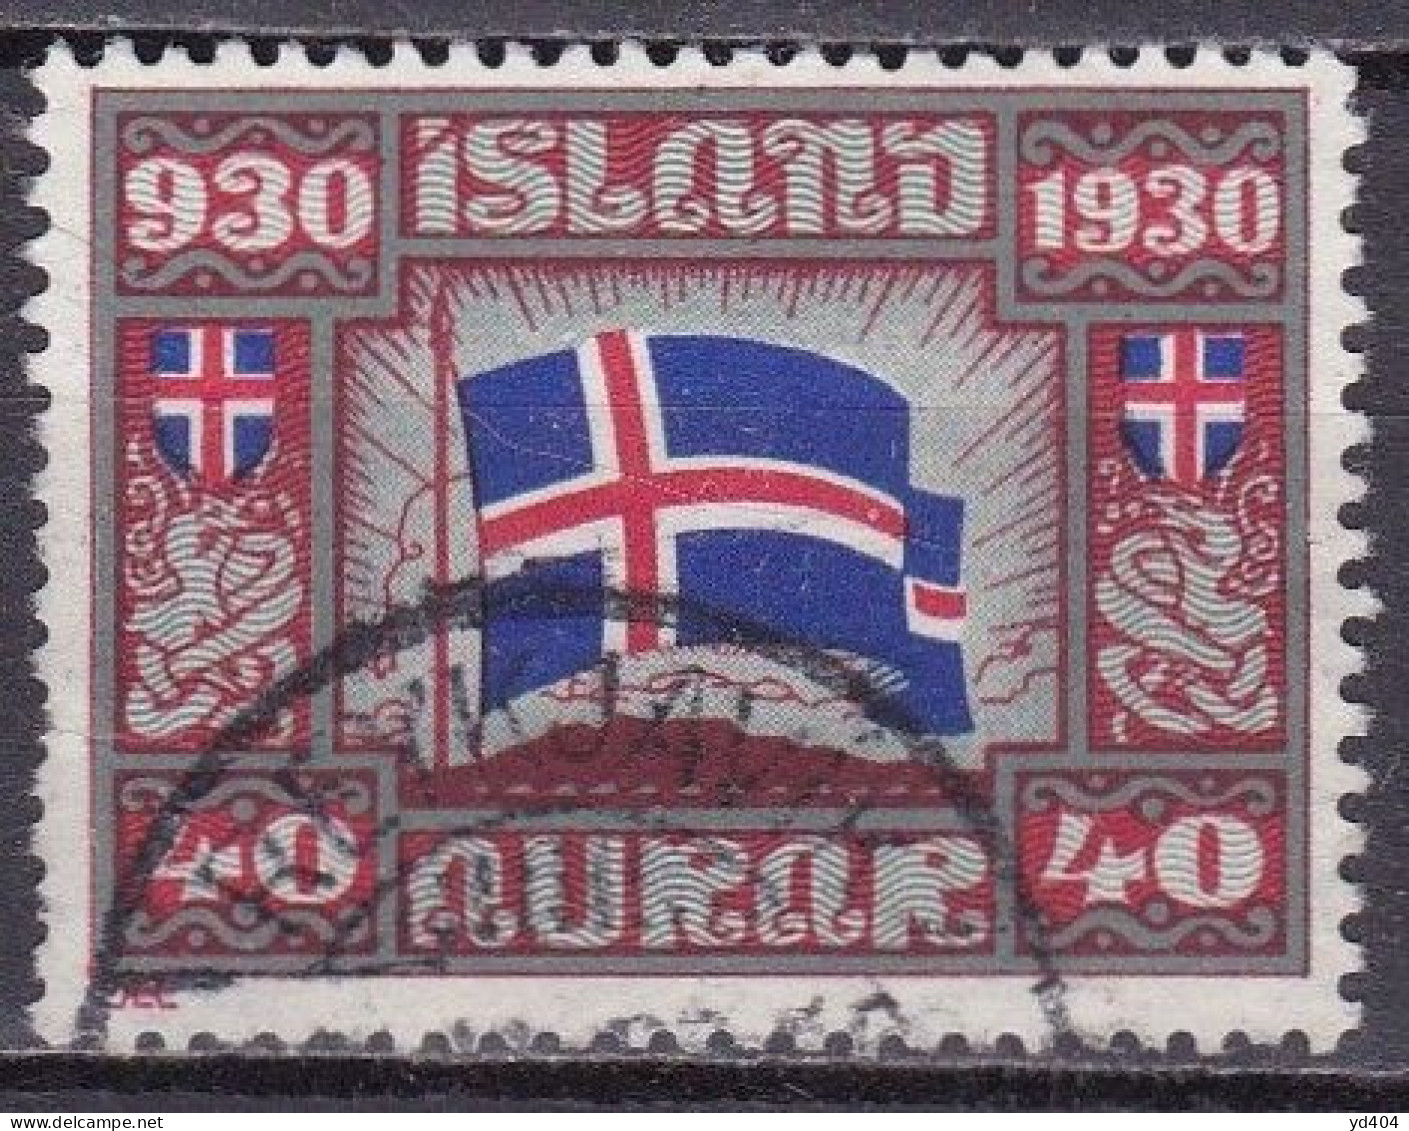 IS020J – ISLANDE – ICELAND – 1930 – MILLENARY OF THE ALTHING – SG # 167 USED 15 € - Usados